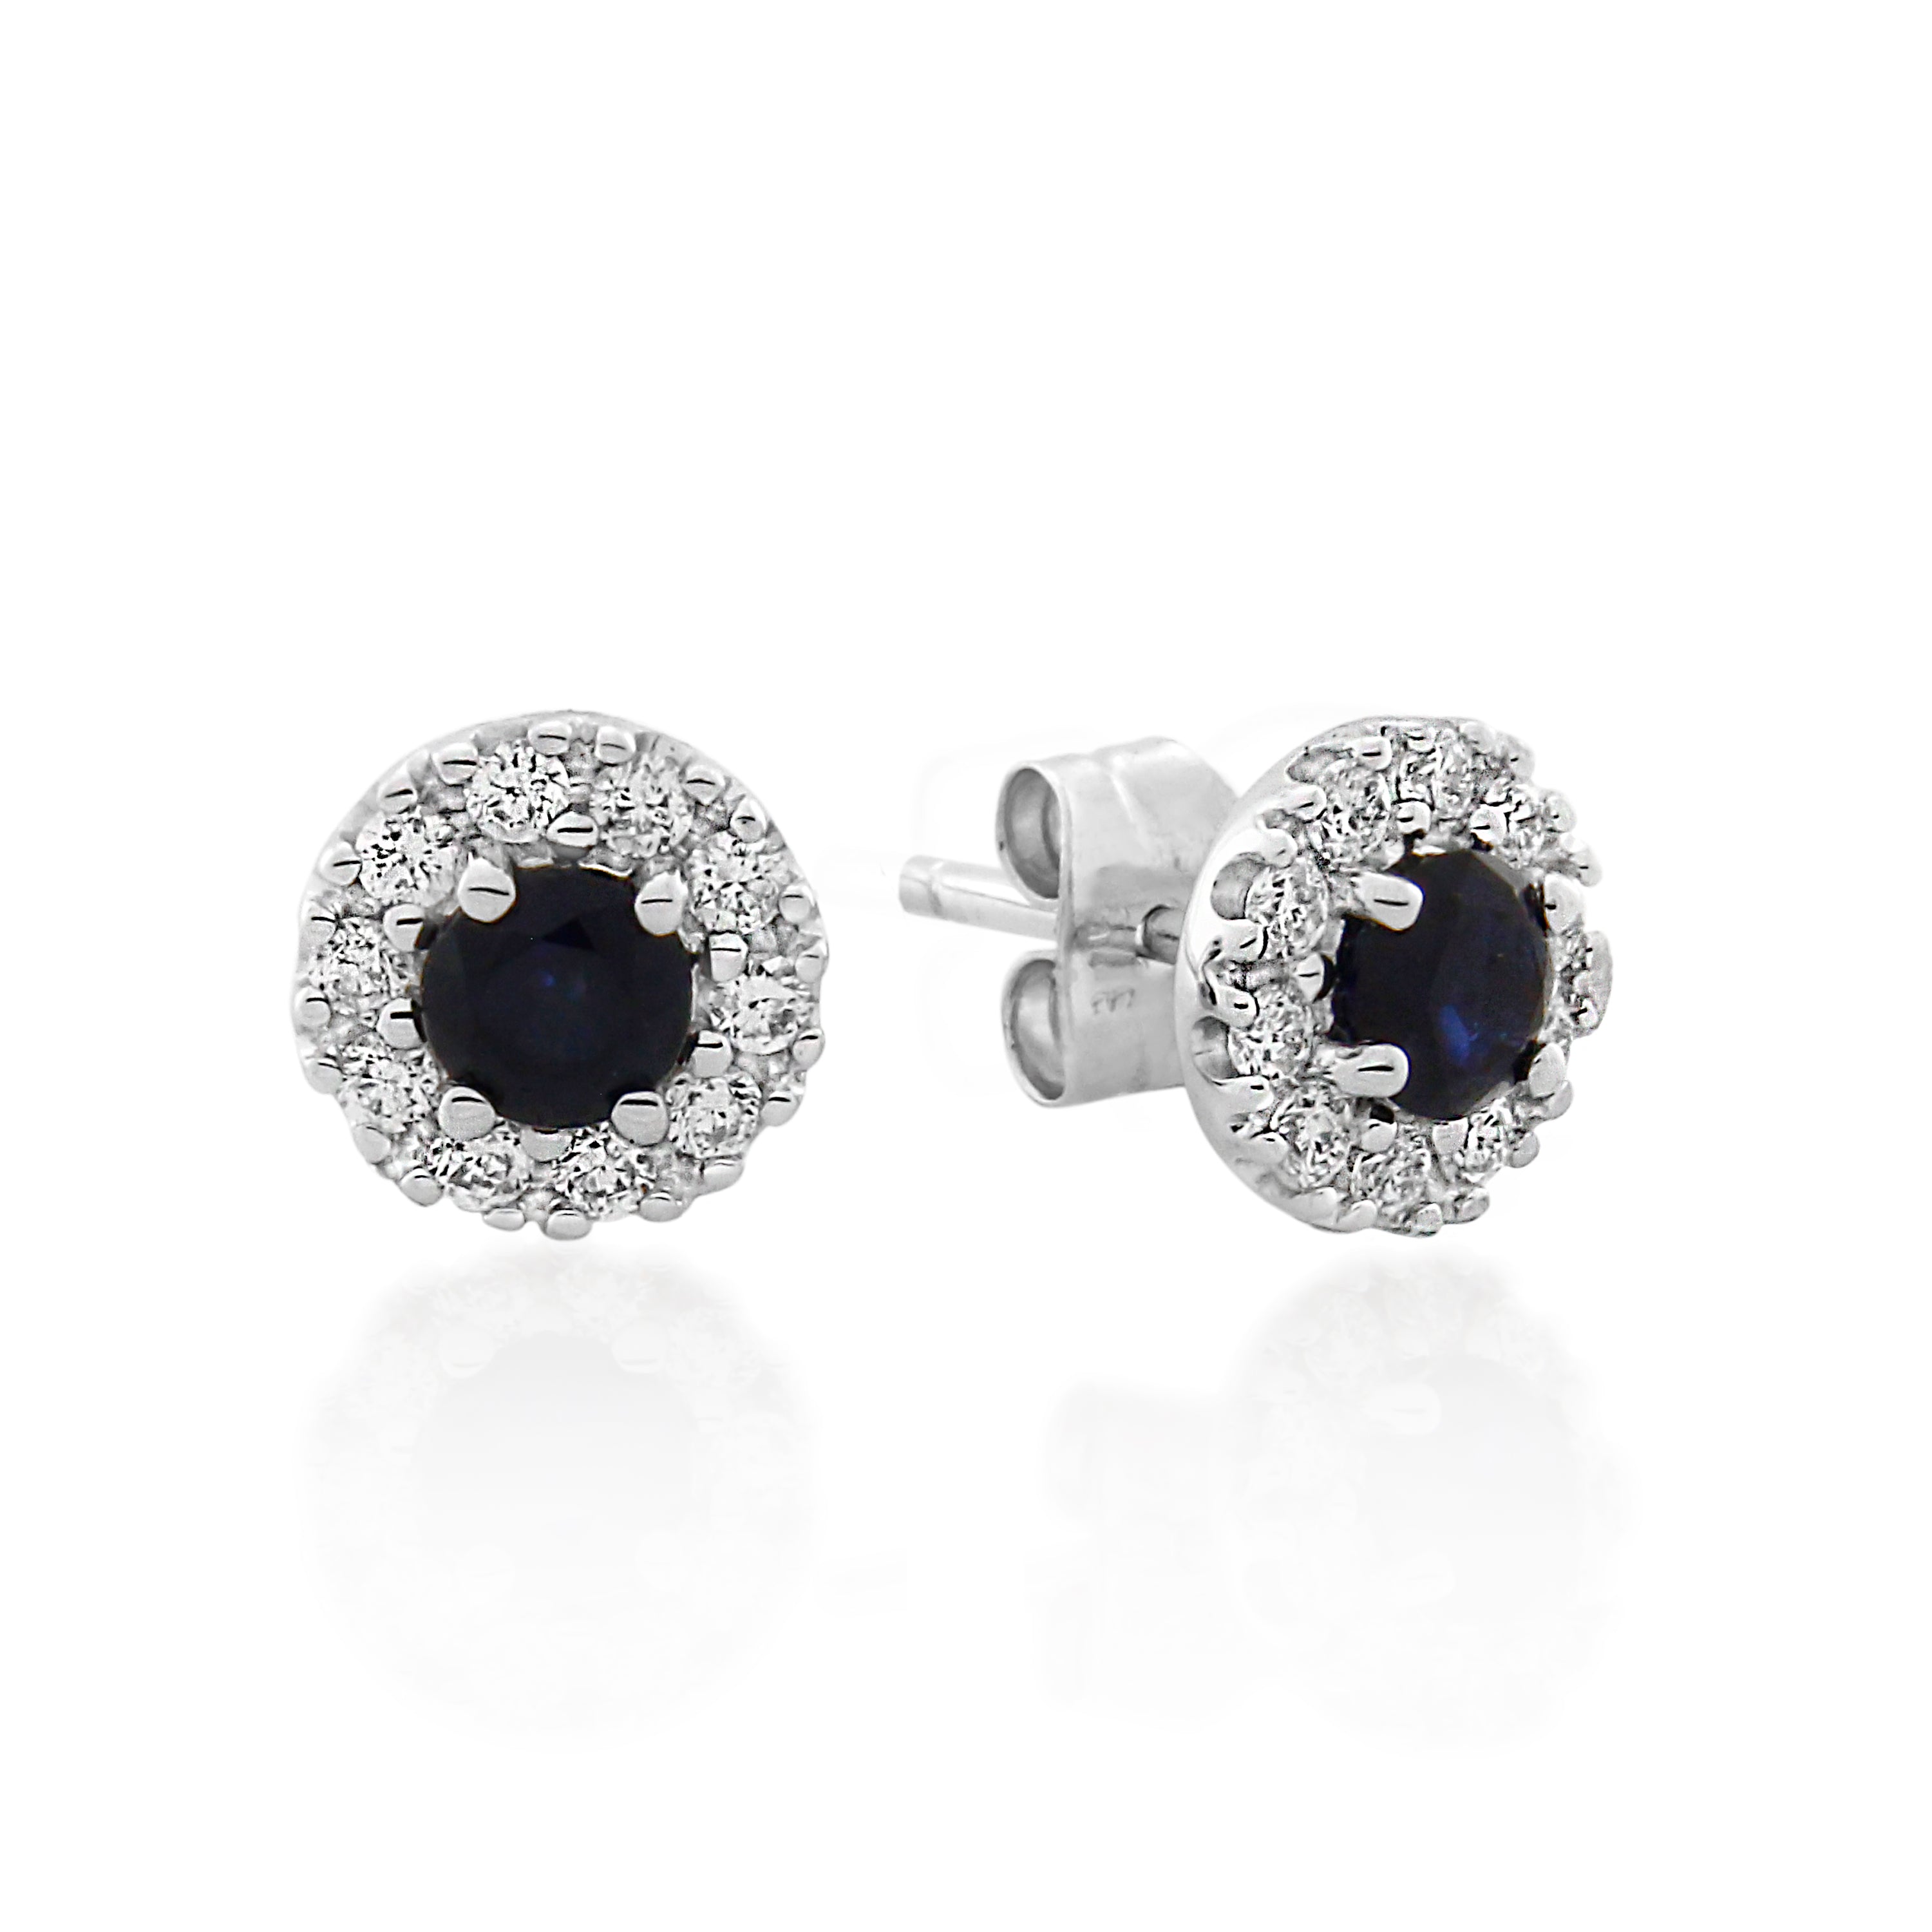 9ct White Gold Sapphire & Diamond Cluster Earrings .24ct TW